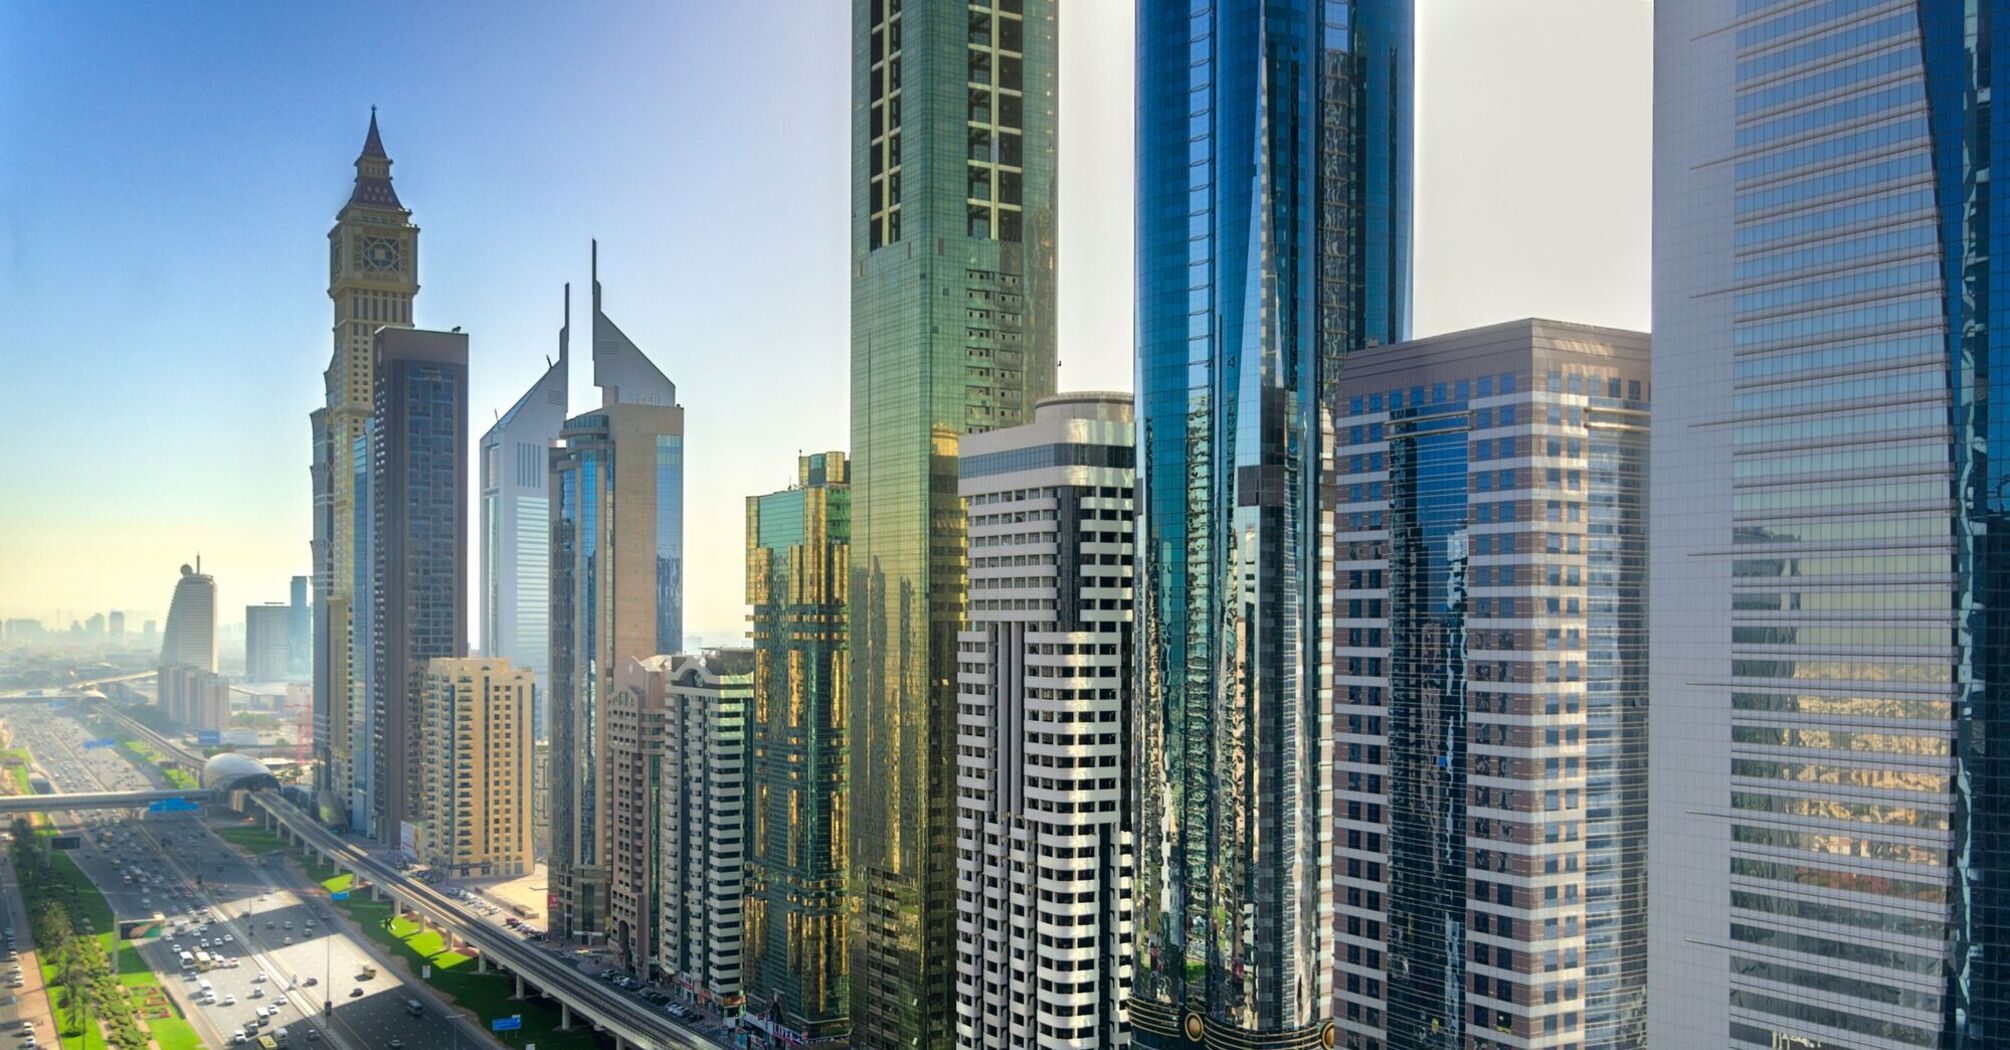 Skyline of Dubai showcasing modern skyscrapers and a bustling cityscape with a clear blue sky